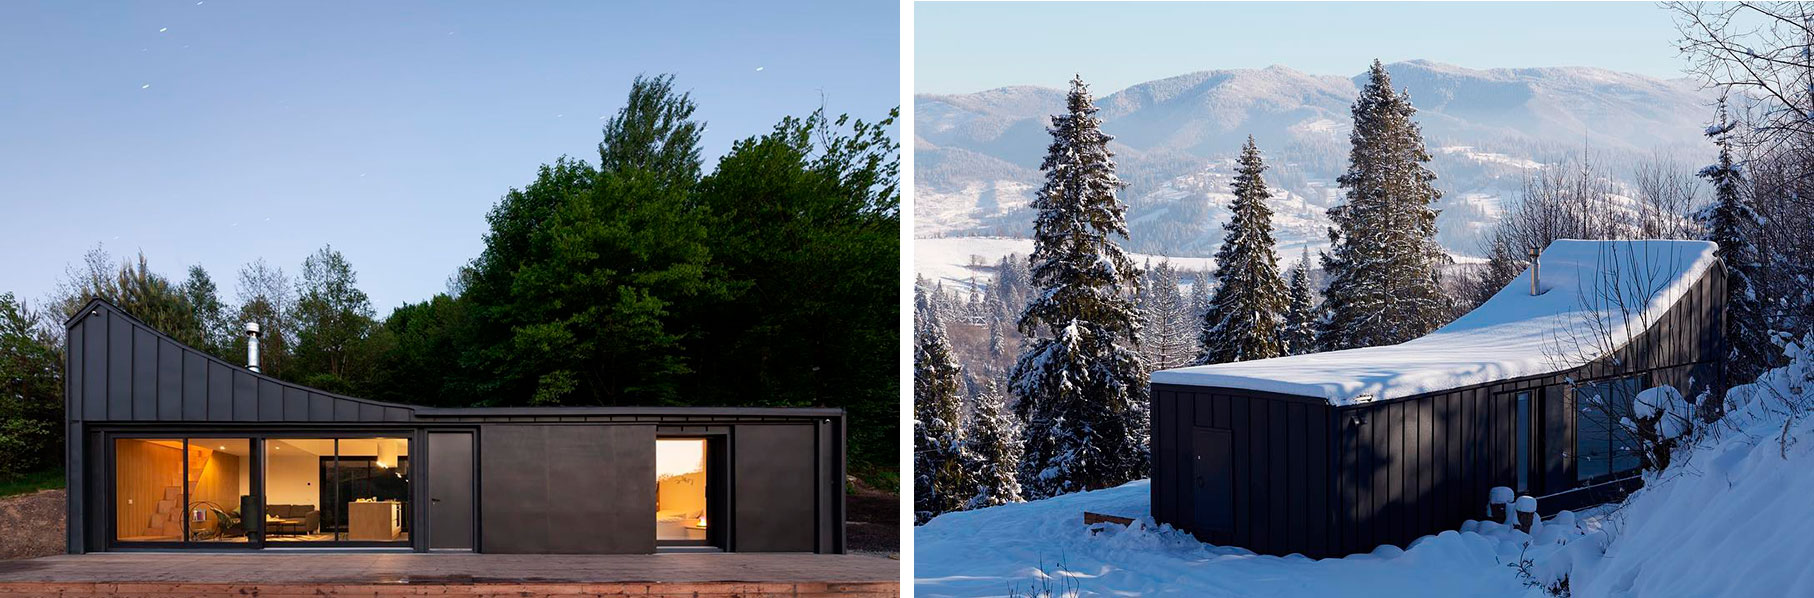 Modern minimalist house with two bedrooms at Cosmos Retreats with all amenities, a terrace, and a barbecue area, located in the forest, offering secluded but city-close nature retreats, shown in both a calm nighttime setting and a snowy winter landscape.